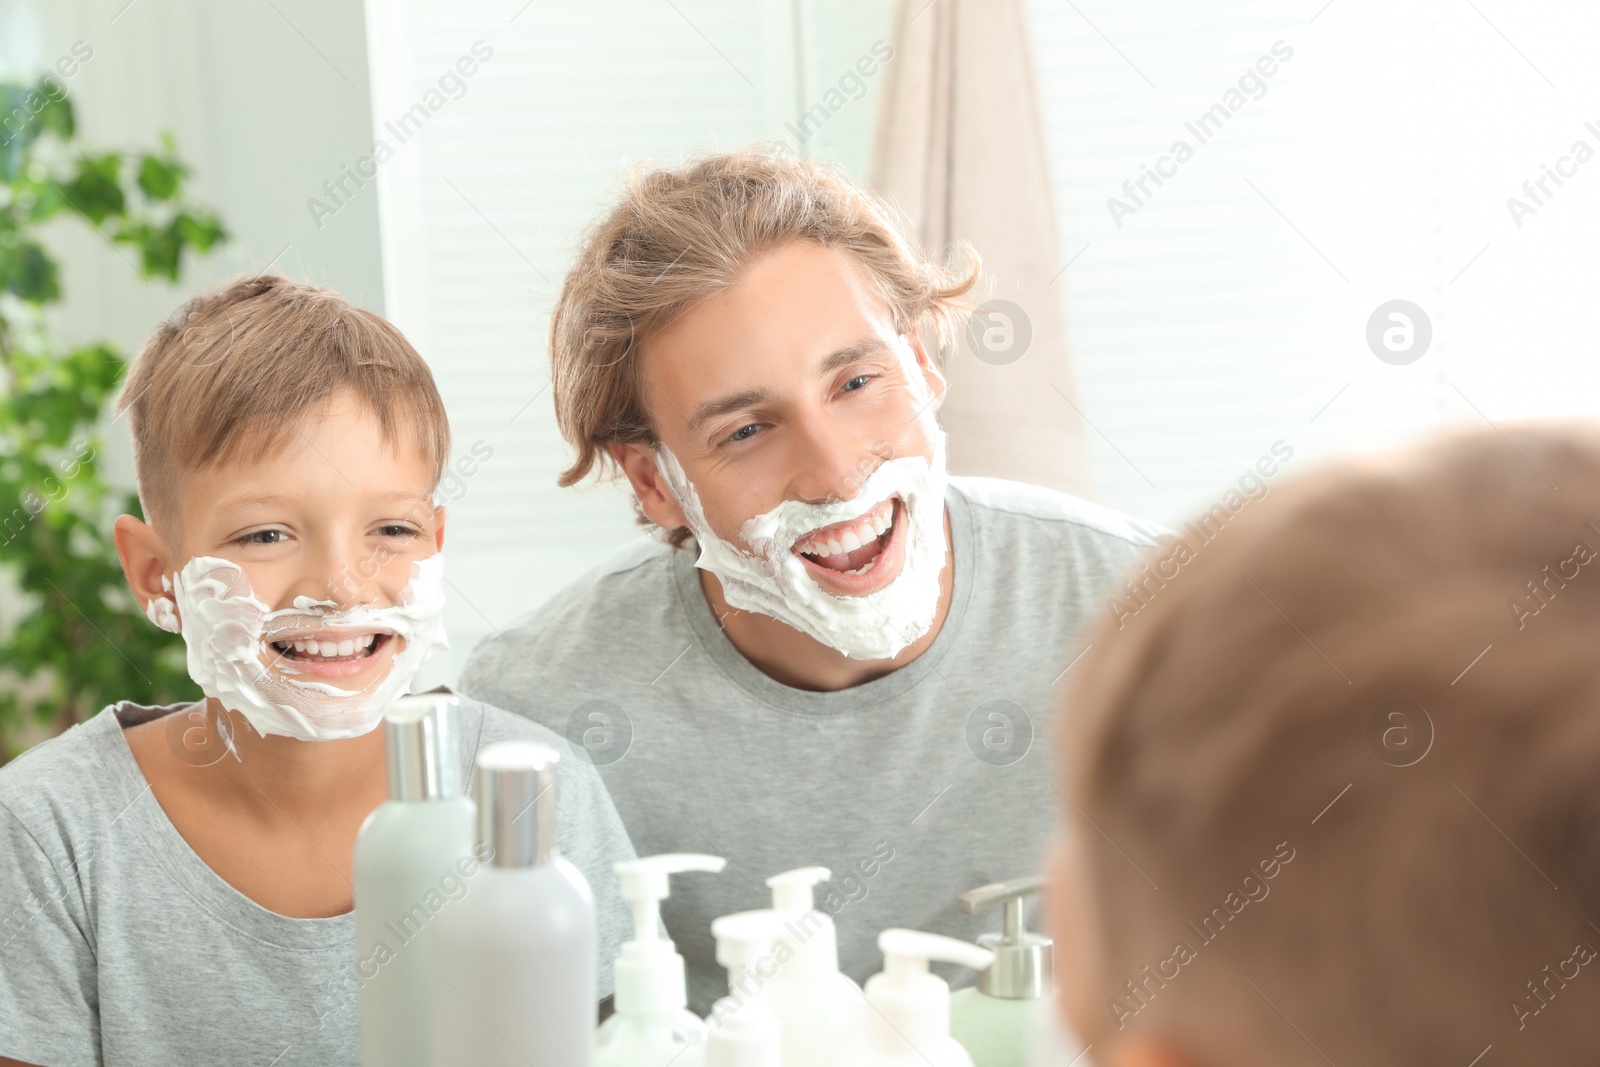 Photo of Father and son with shaving foam on faces in bathroom